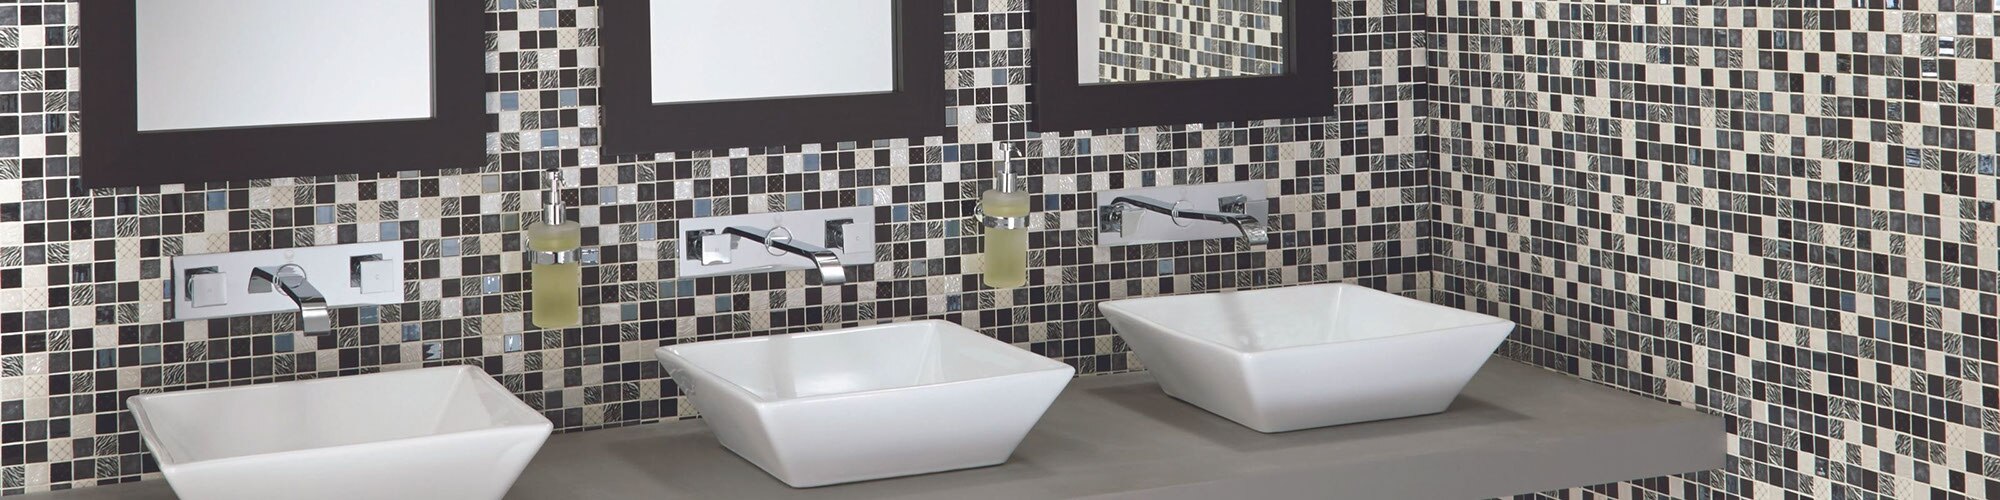 Restaurant bathroom with off-white, gray, and brown glass mosaic backsplash, polished silver wall mounted faucet, 3 white vessel sinks on gray floating vanity.